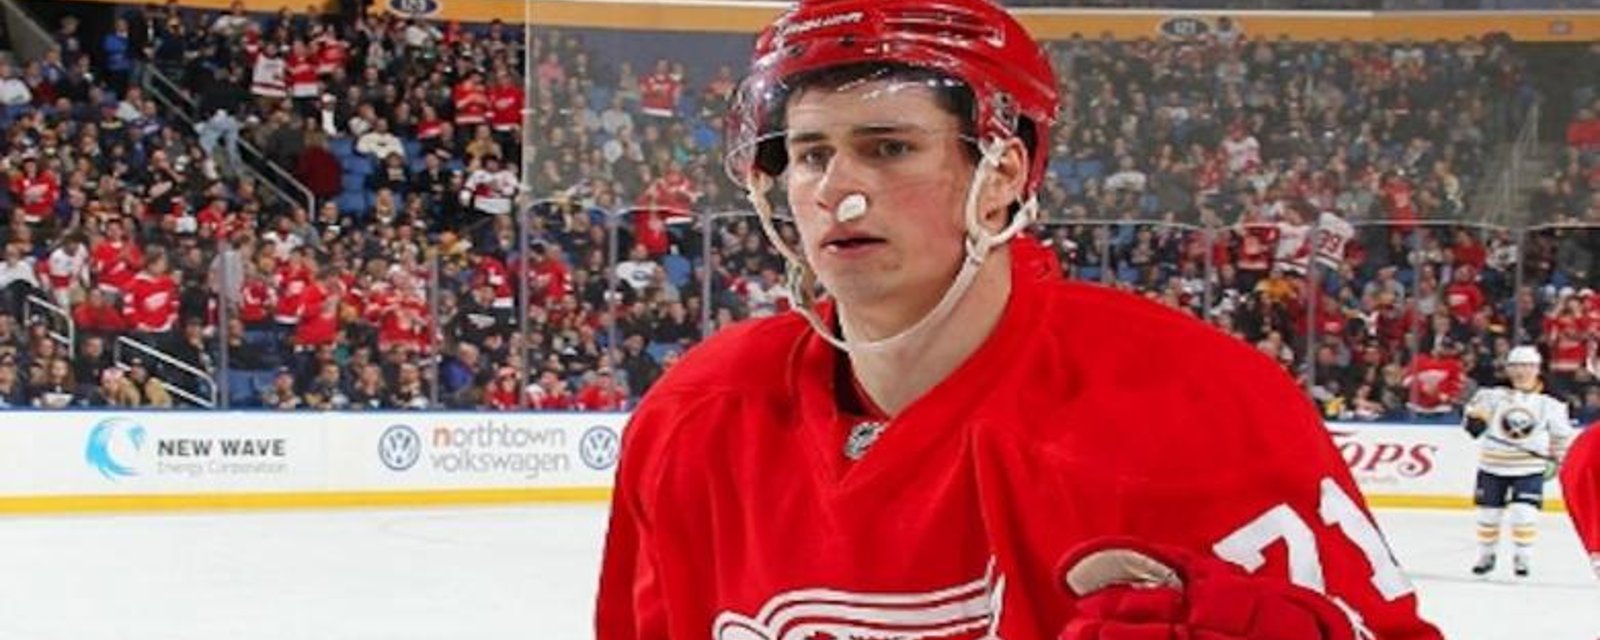 Must See: Dylan Larkin proved is the real deal last night.